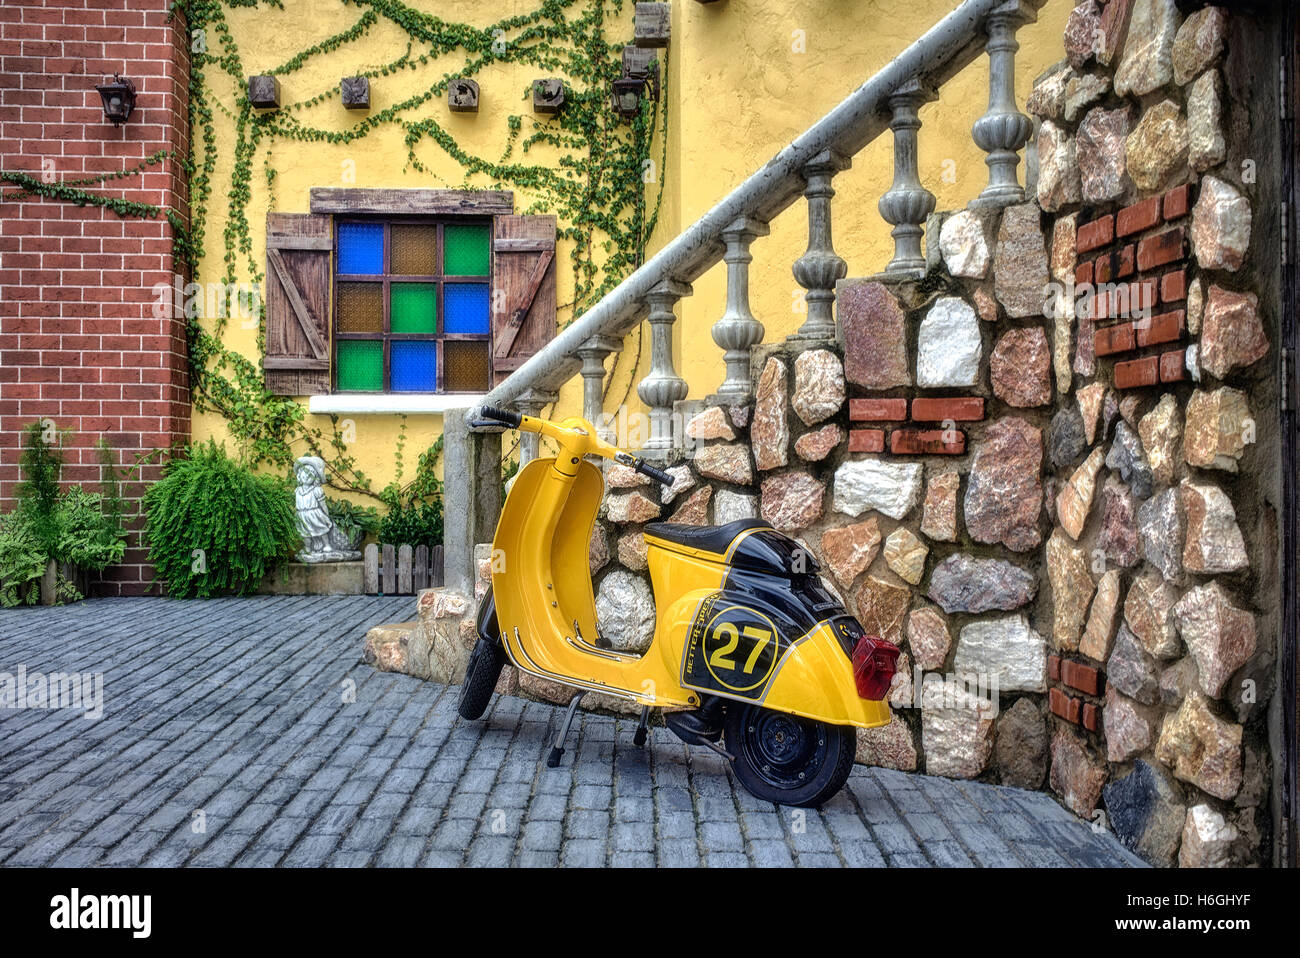 vintage Vespa scooter parked in an Italian forecourt. Italy Europe Stock Photo